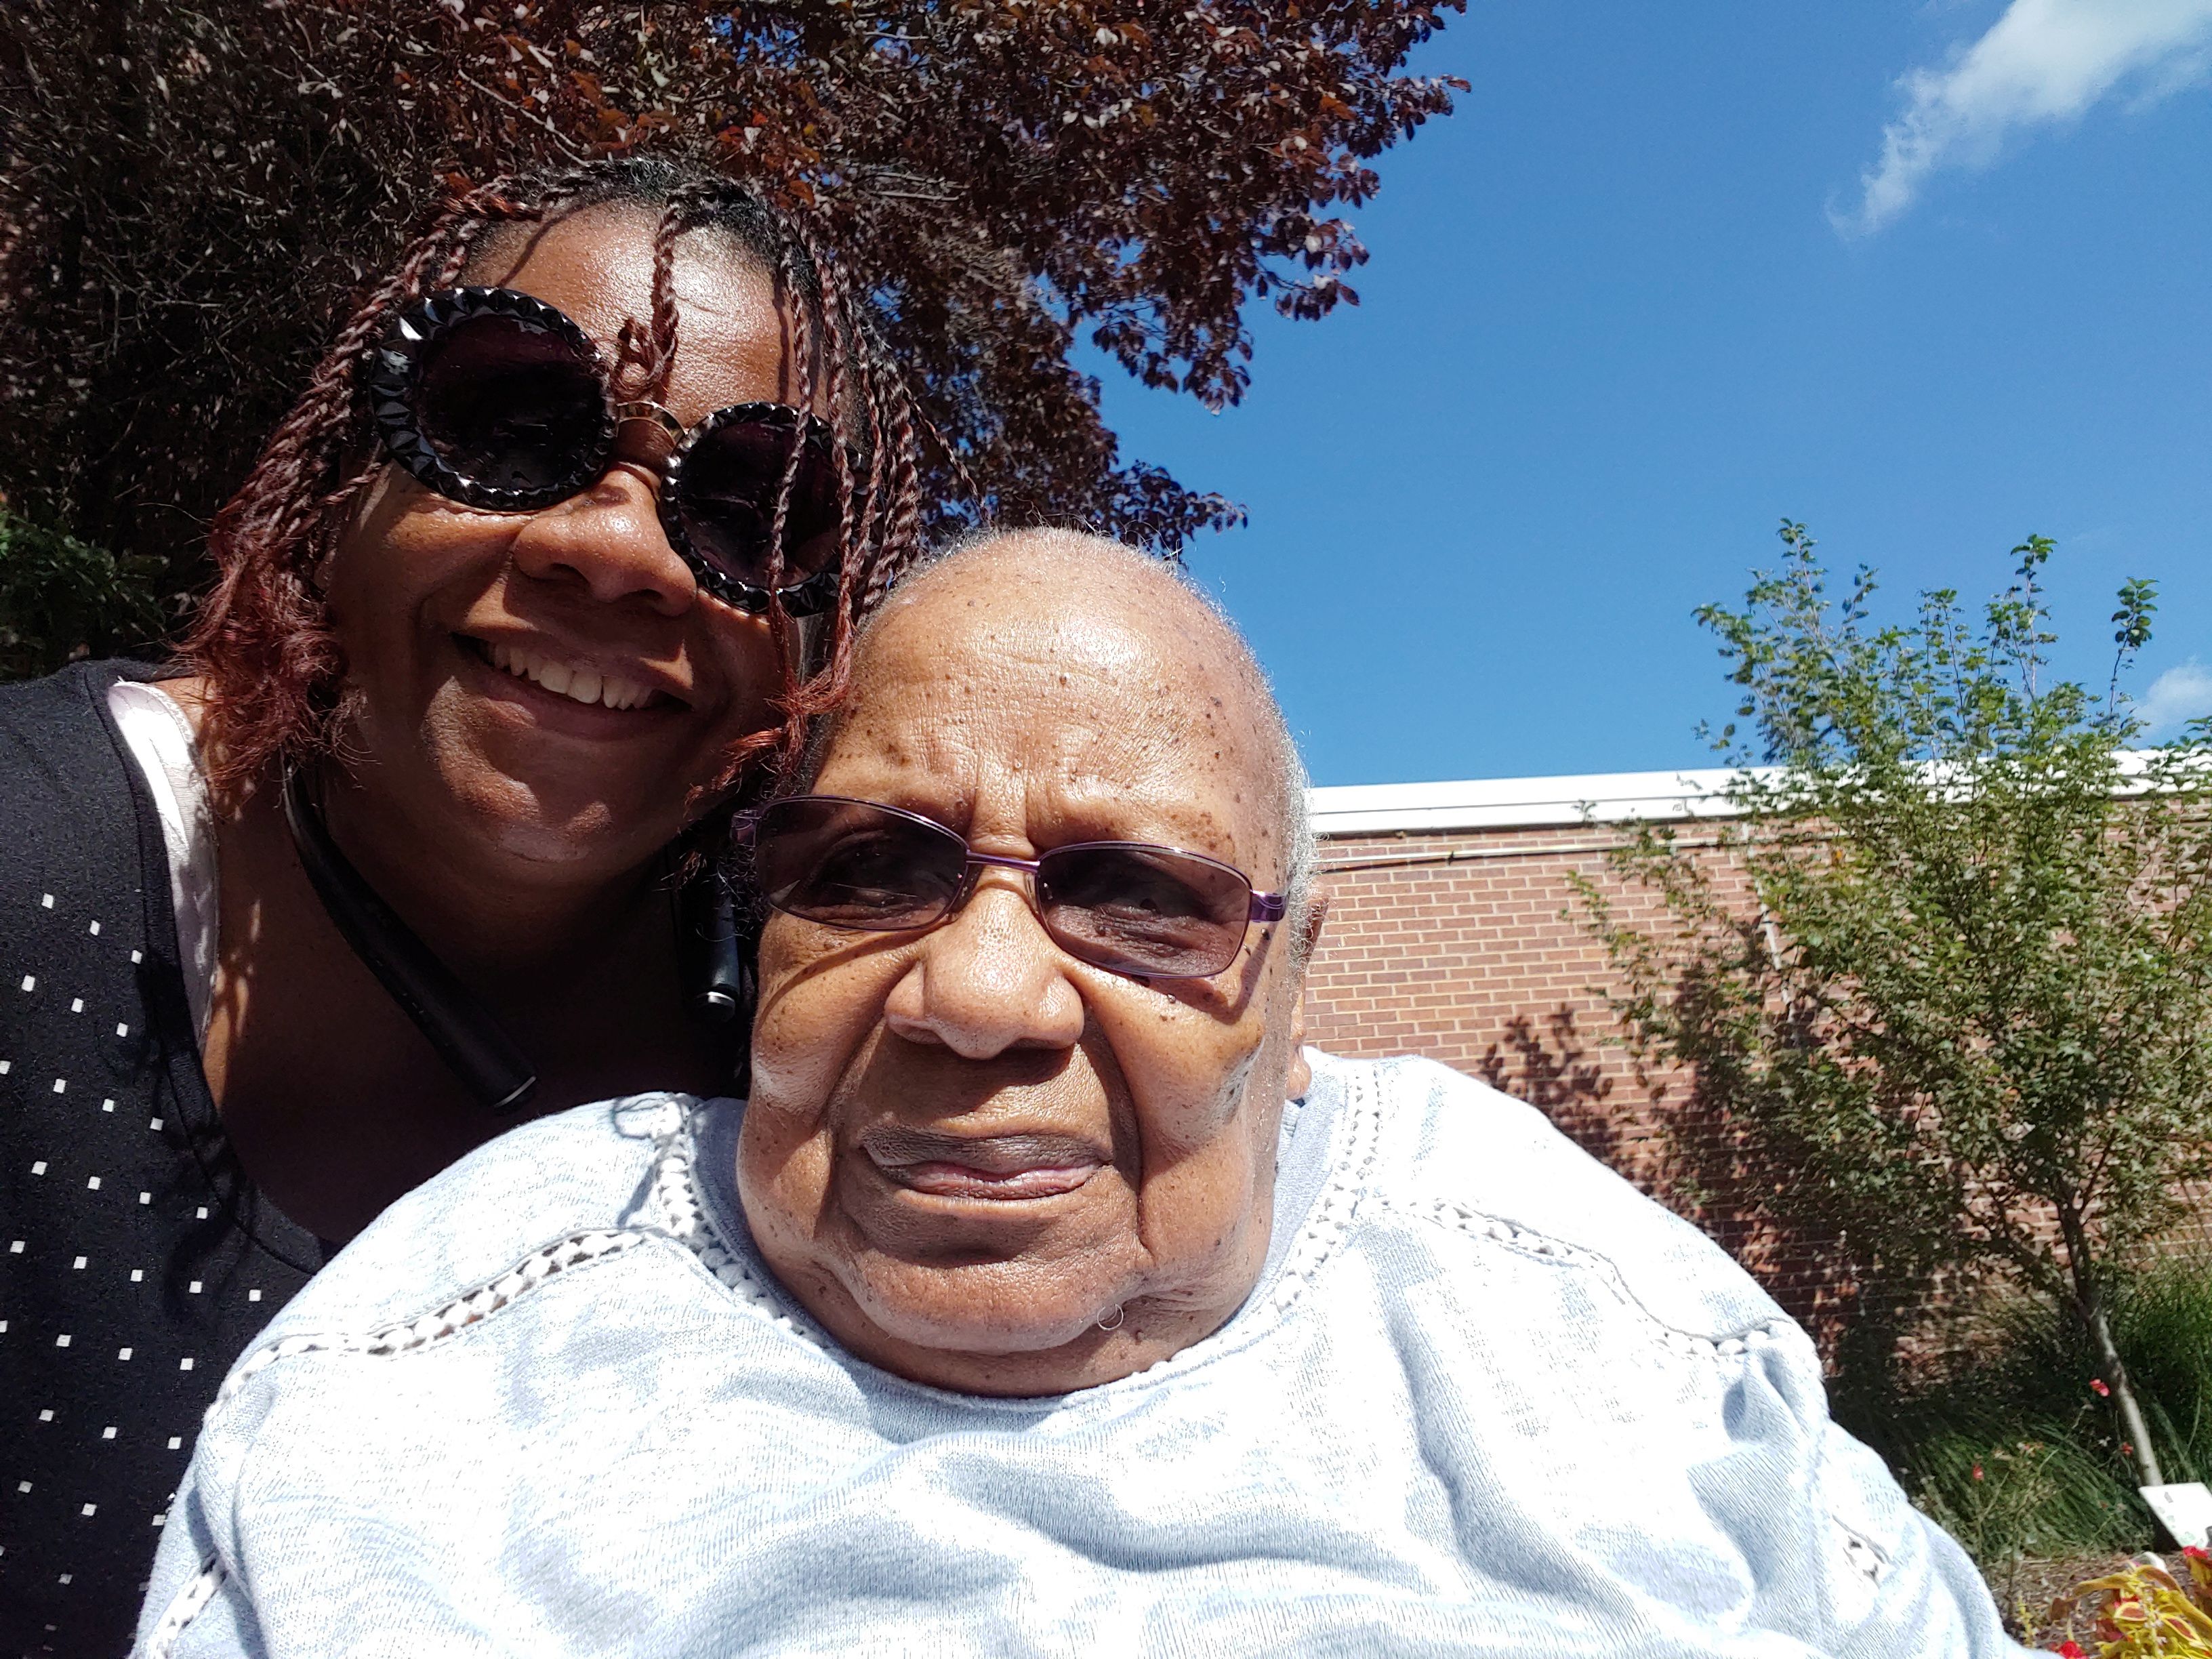 Garnice Robertson poses with her mother Georgia Mae Clardy at a nursing facility in Kansas City